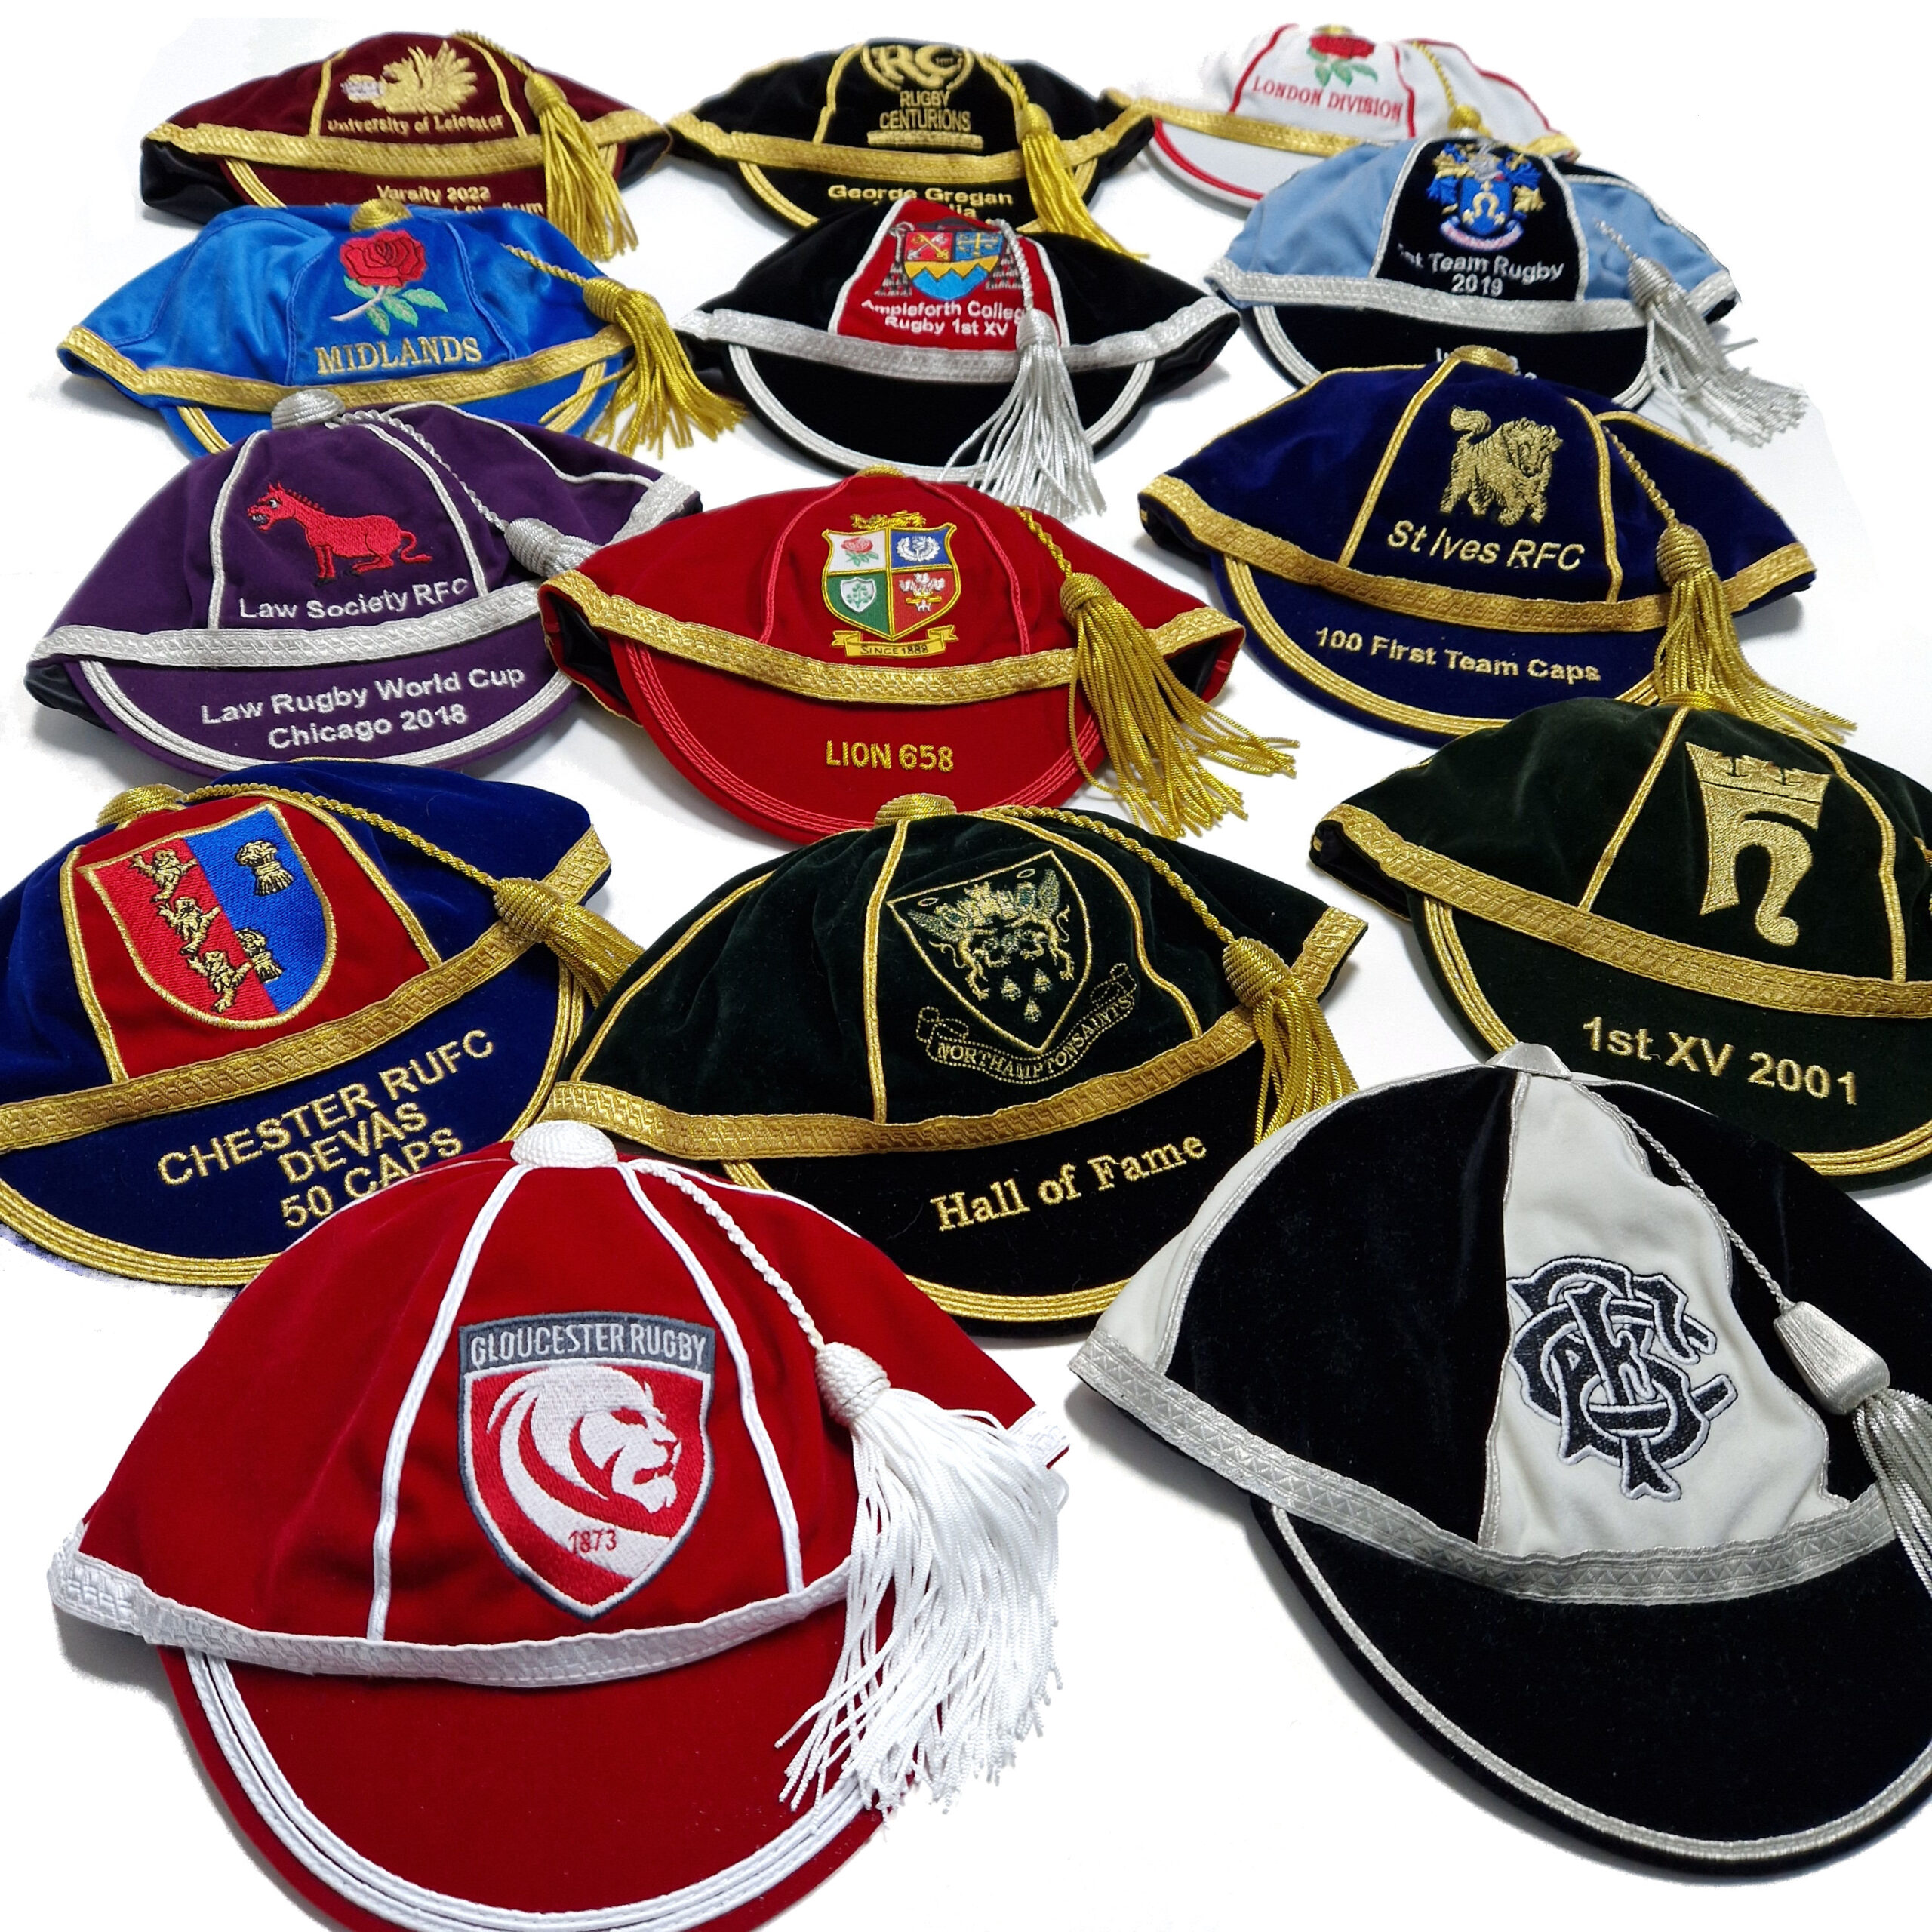 A range of our presentation or honours caps in neat columns showcasing the range of clubs and teams we support with awards evenings and celebrating achievements.